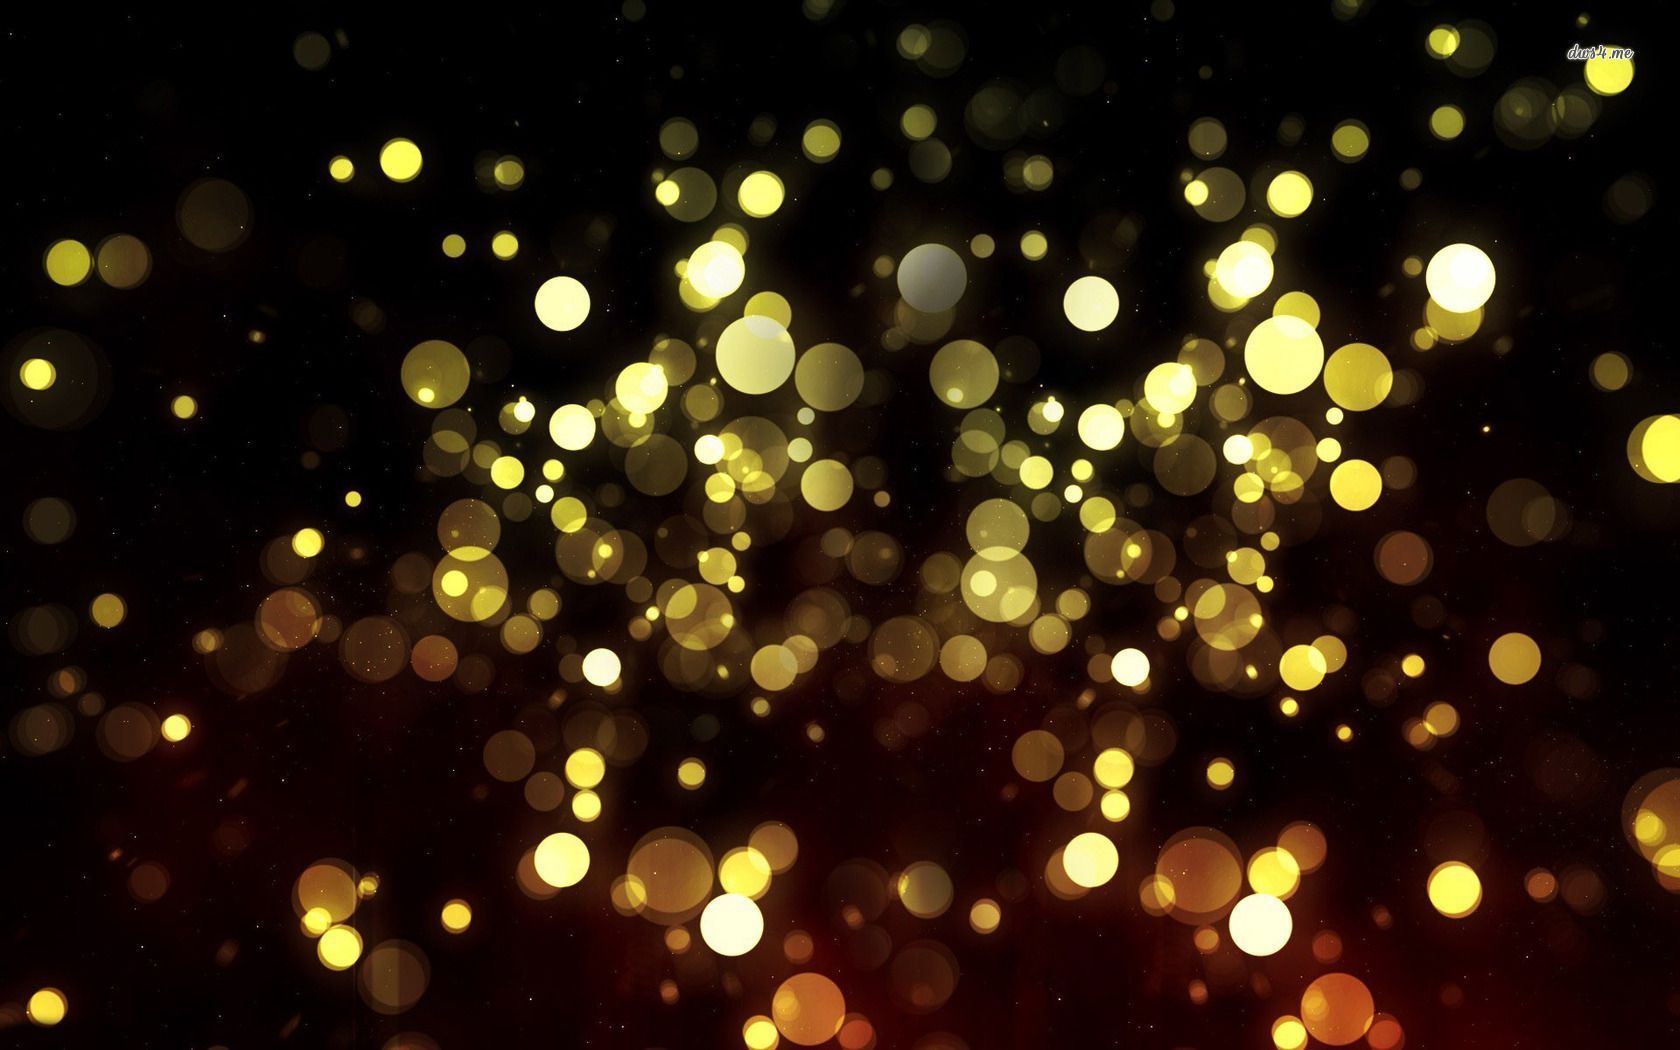 Light Bubbles wallpaper - Abstract wallpapers - #5213